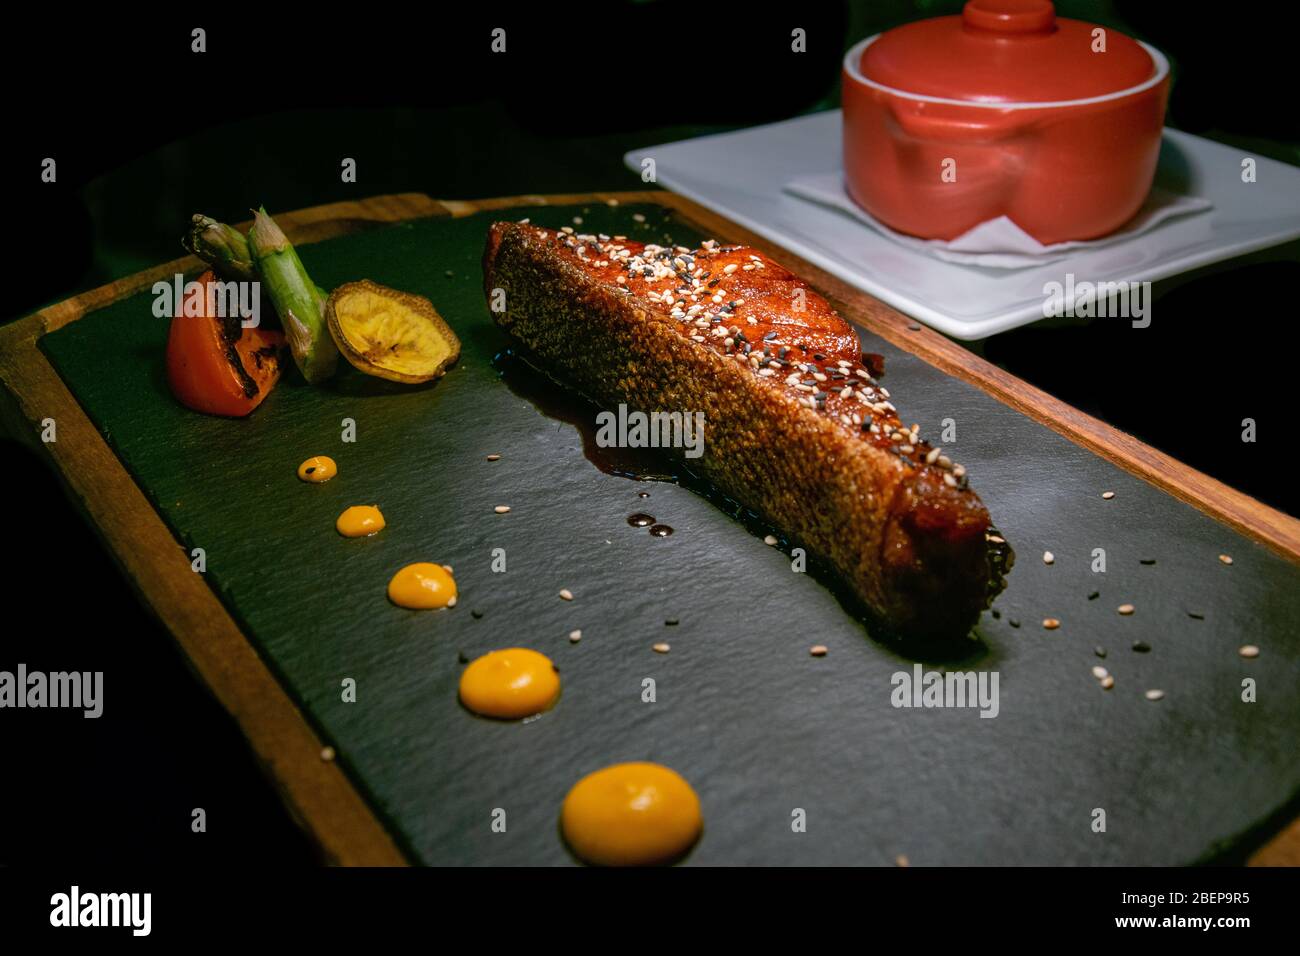 a piece of Canadian salmon cooked in a teriyaki sauce served on a stone and wood plate alongside a side dish of steamed rice Stock Photo